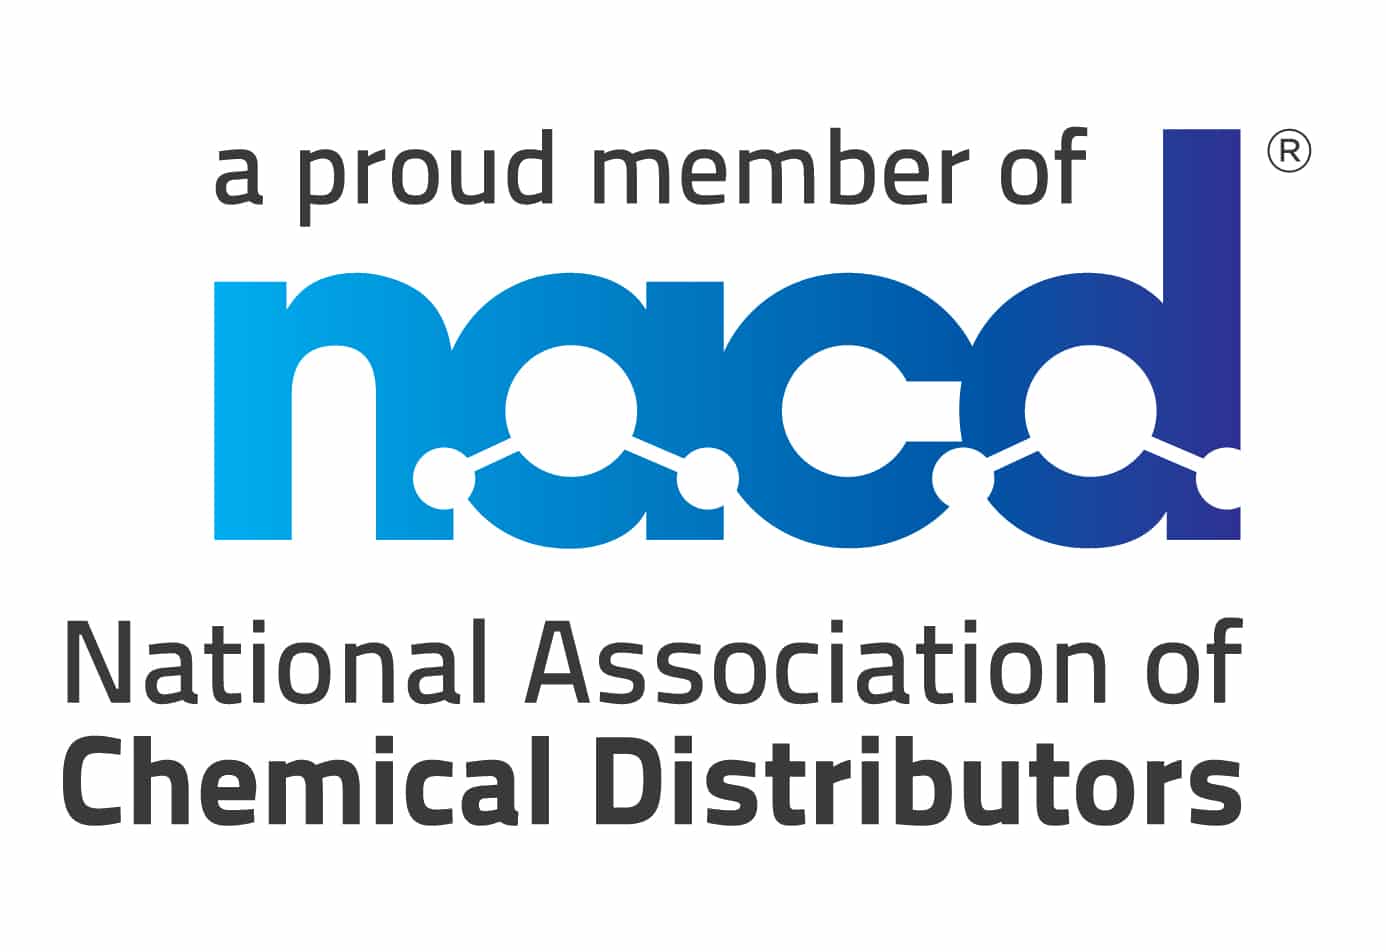 A Proud Member of NACD, National Association of Chemical Distributors